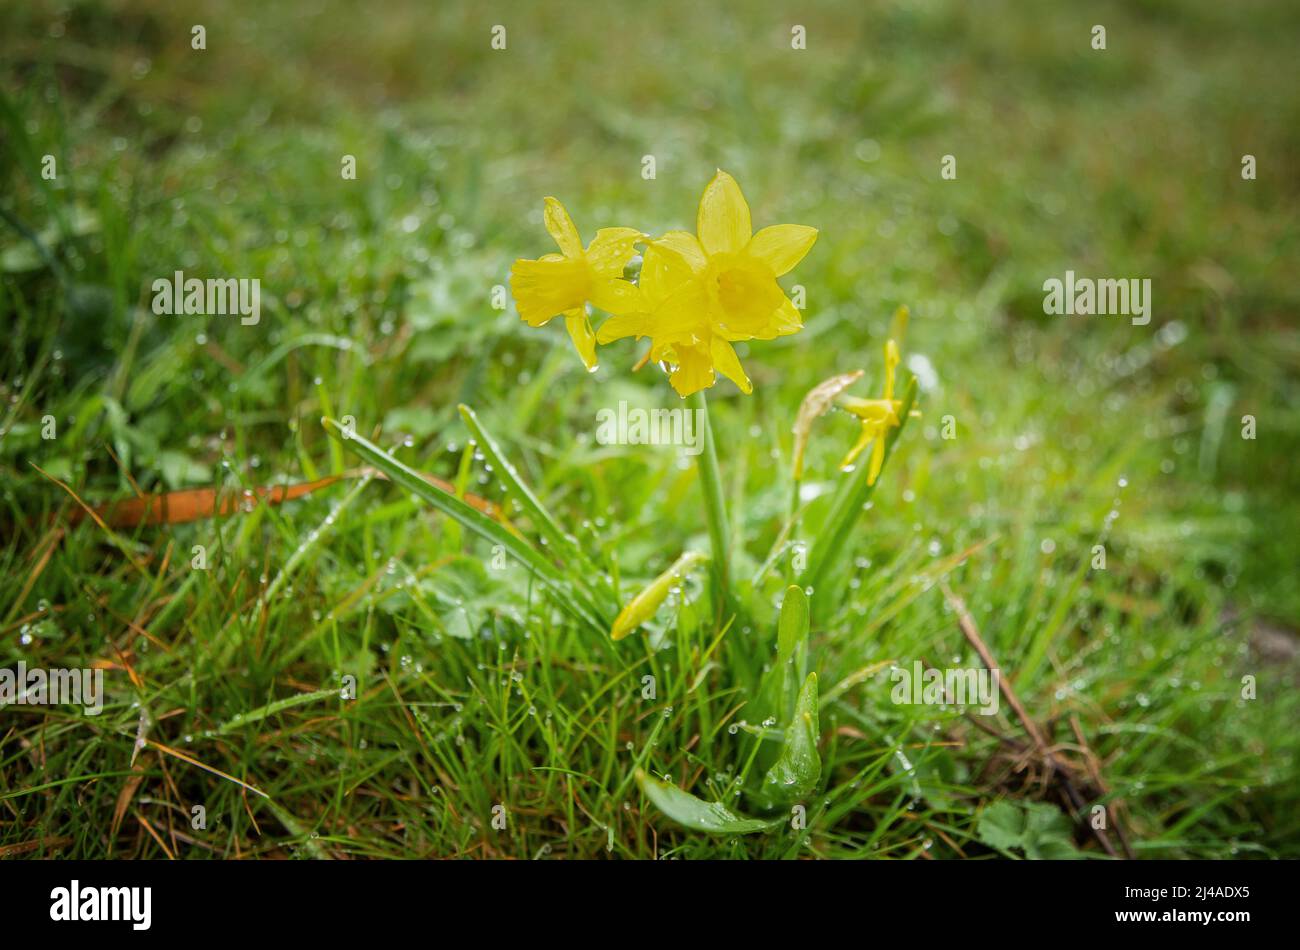 Wild Yellow Trumpet Narcissus, Narcissus, with raindrops on petals and stem leaves in a green ground of shaggy grasses Stock Photo